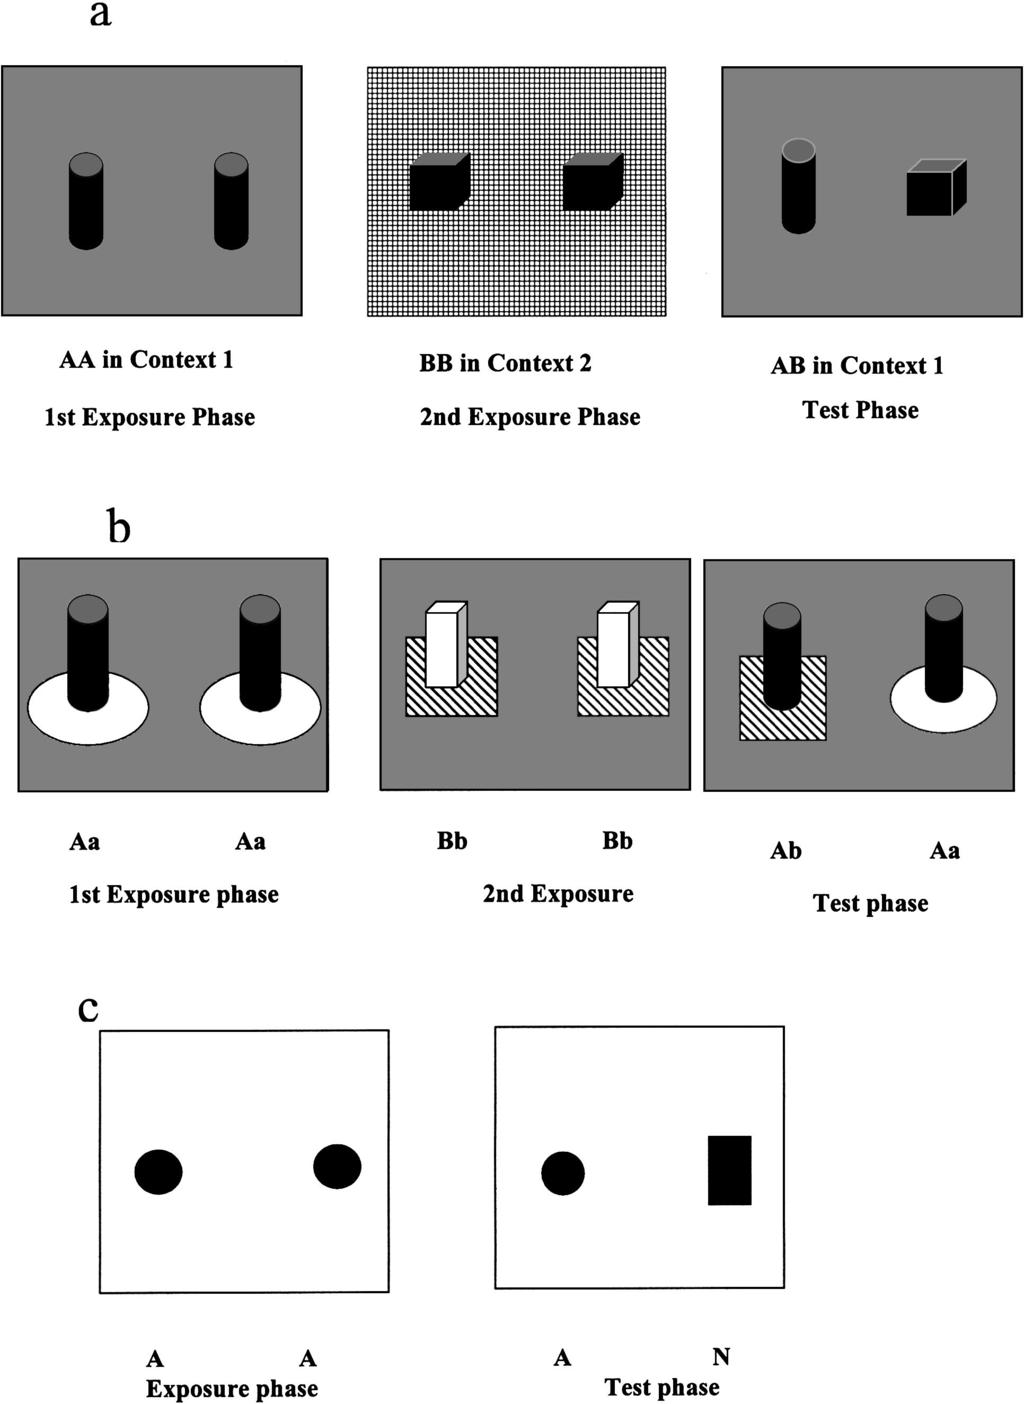 MEMORY FOR CONTEXT AND OBJECTS 559 Figure 1. Schema illustrating the exposure phases and test phase of each experiment. a: Experiment 1 (context). b: Experiment 2 (object as context).